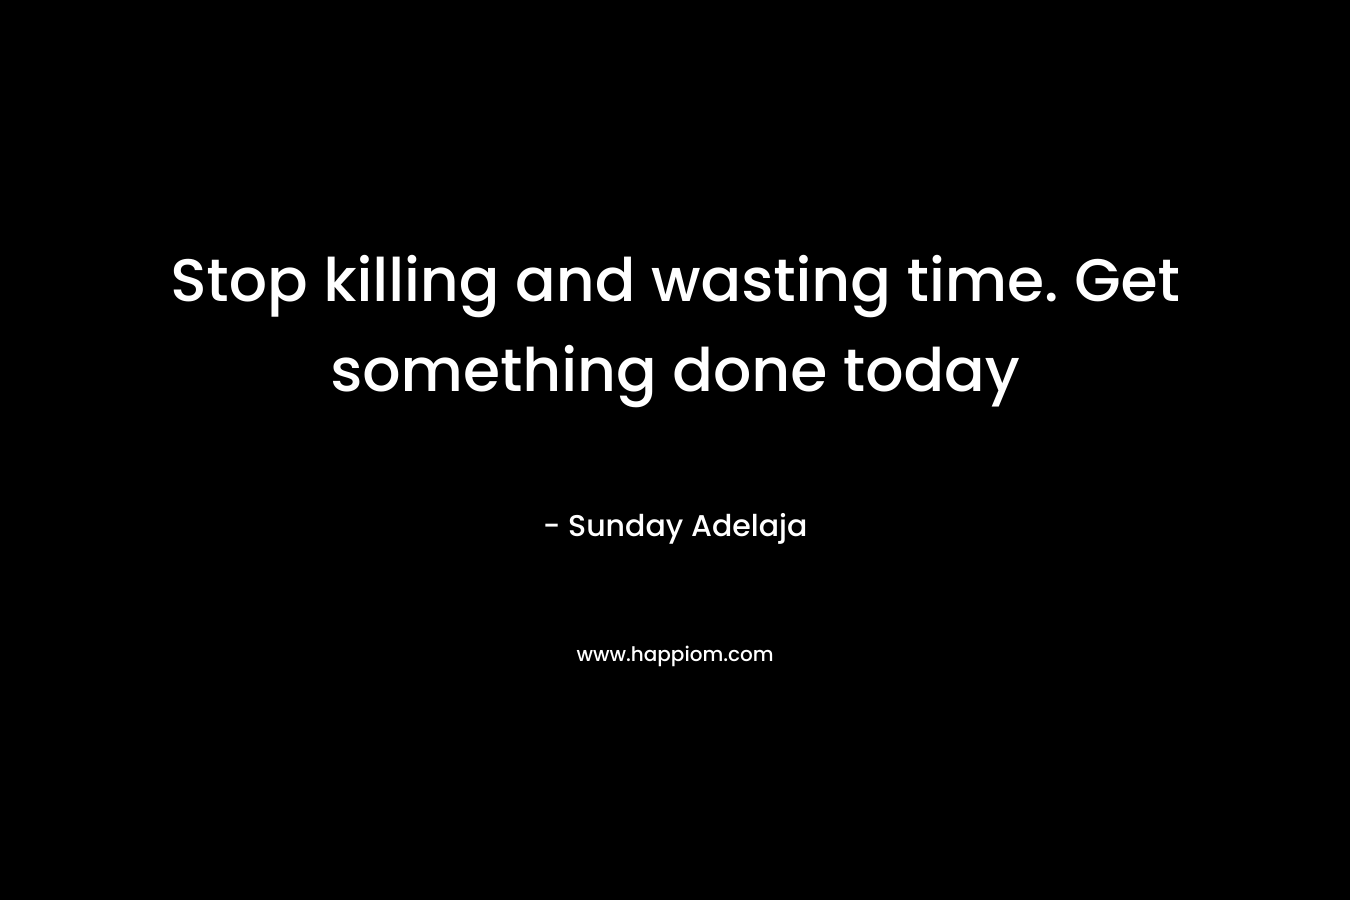 Stop killing and wasting time. Get something done today